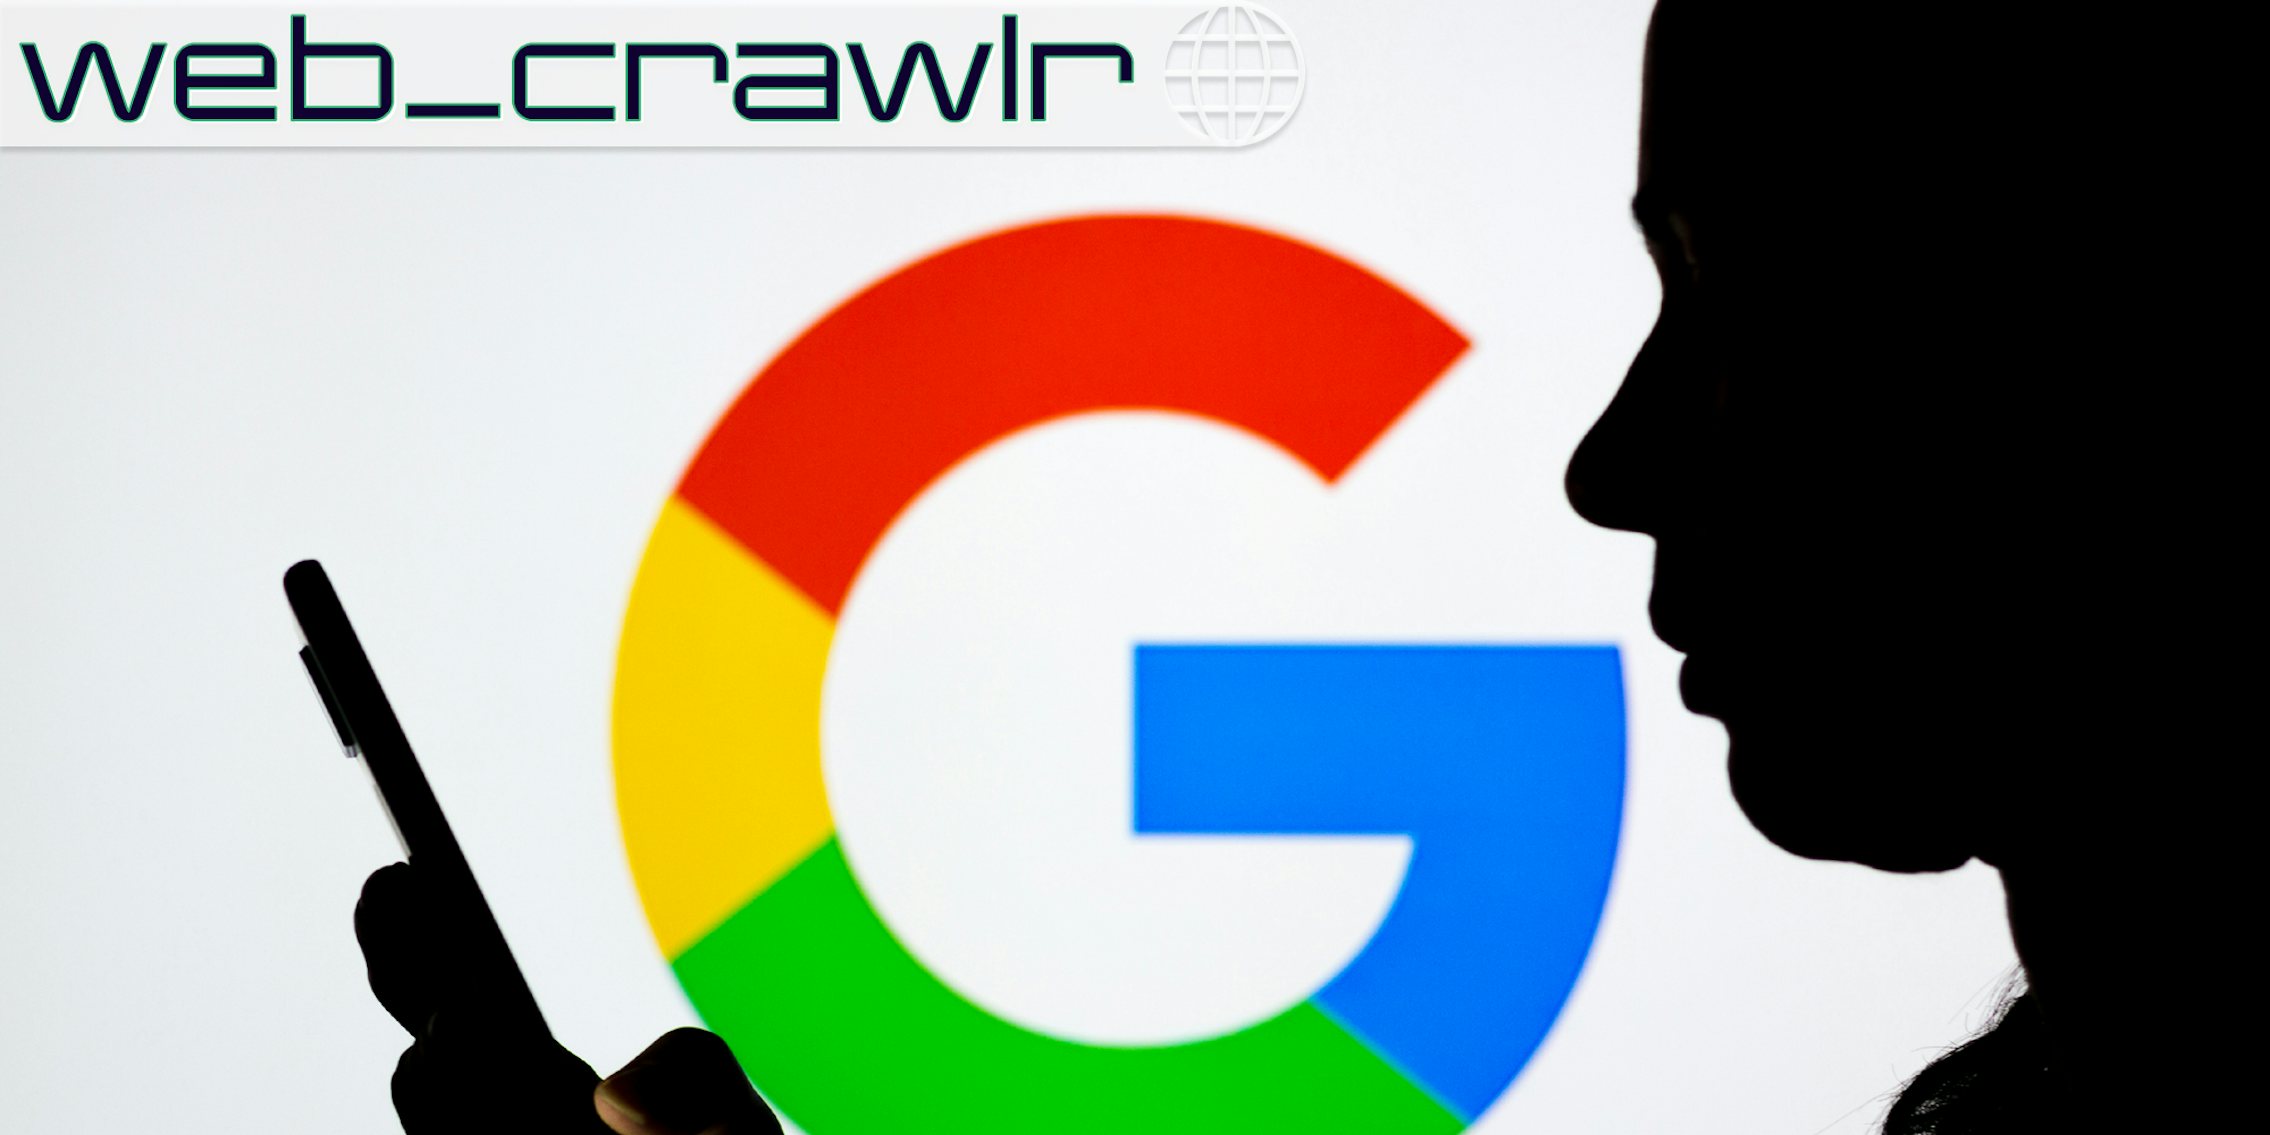 A person holding a phone. The Google logo is in the background. The Daily Dot newsletter web_crawlr logo is in the top left corner.